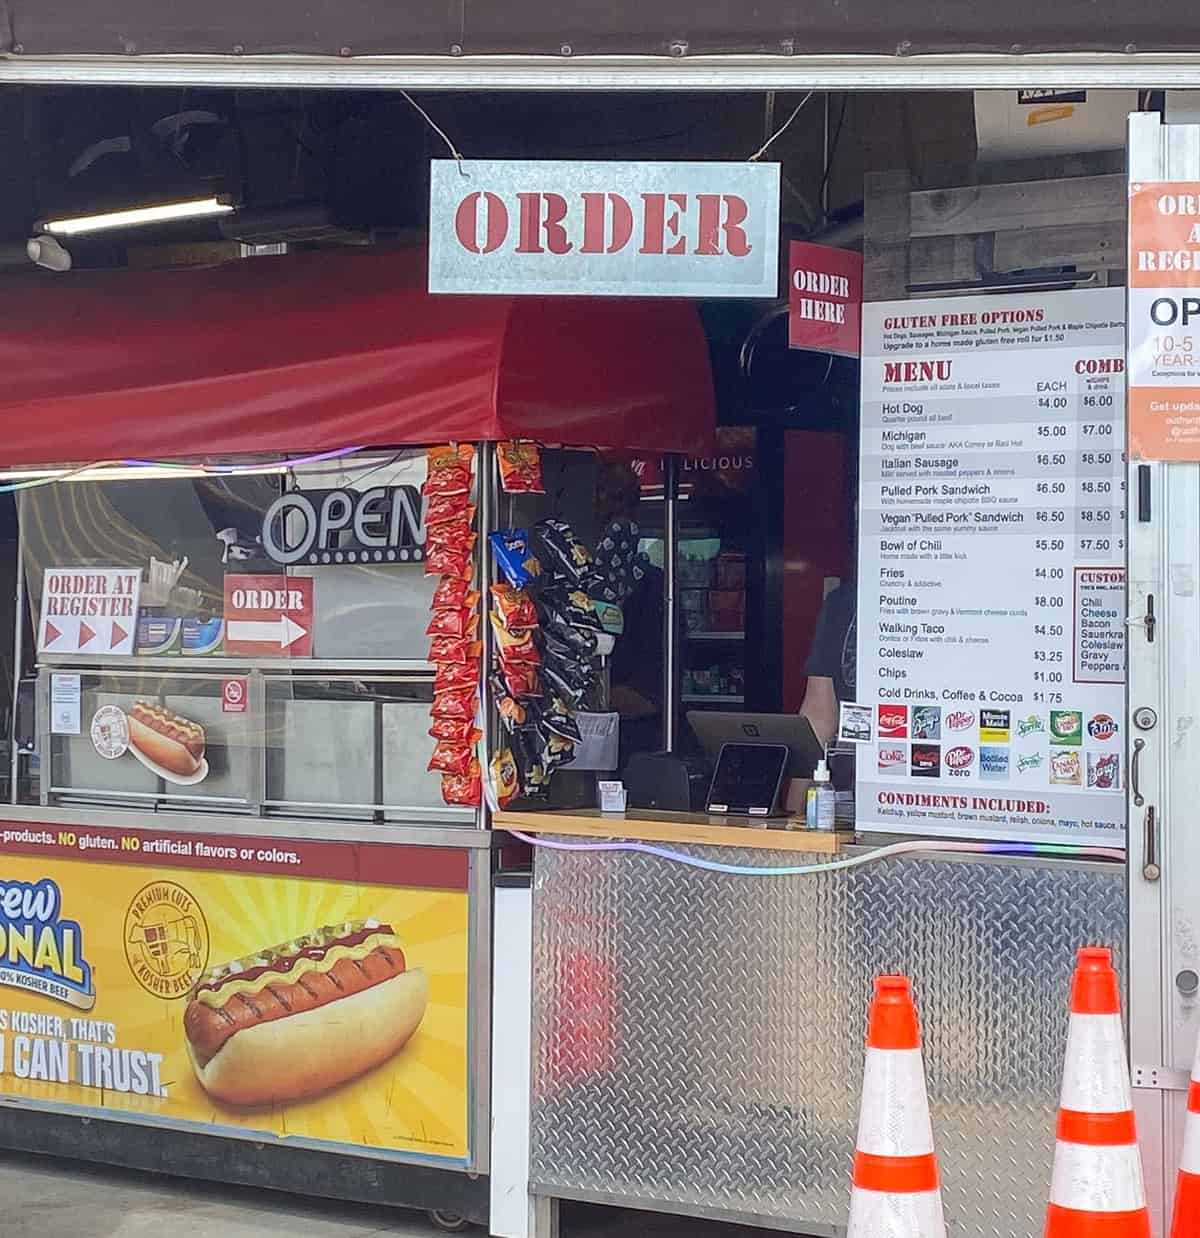 Order counter of a hot dog stand.